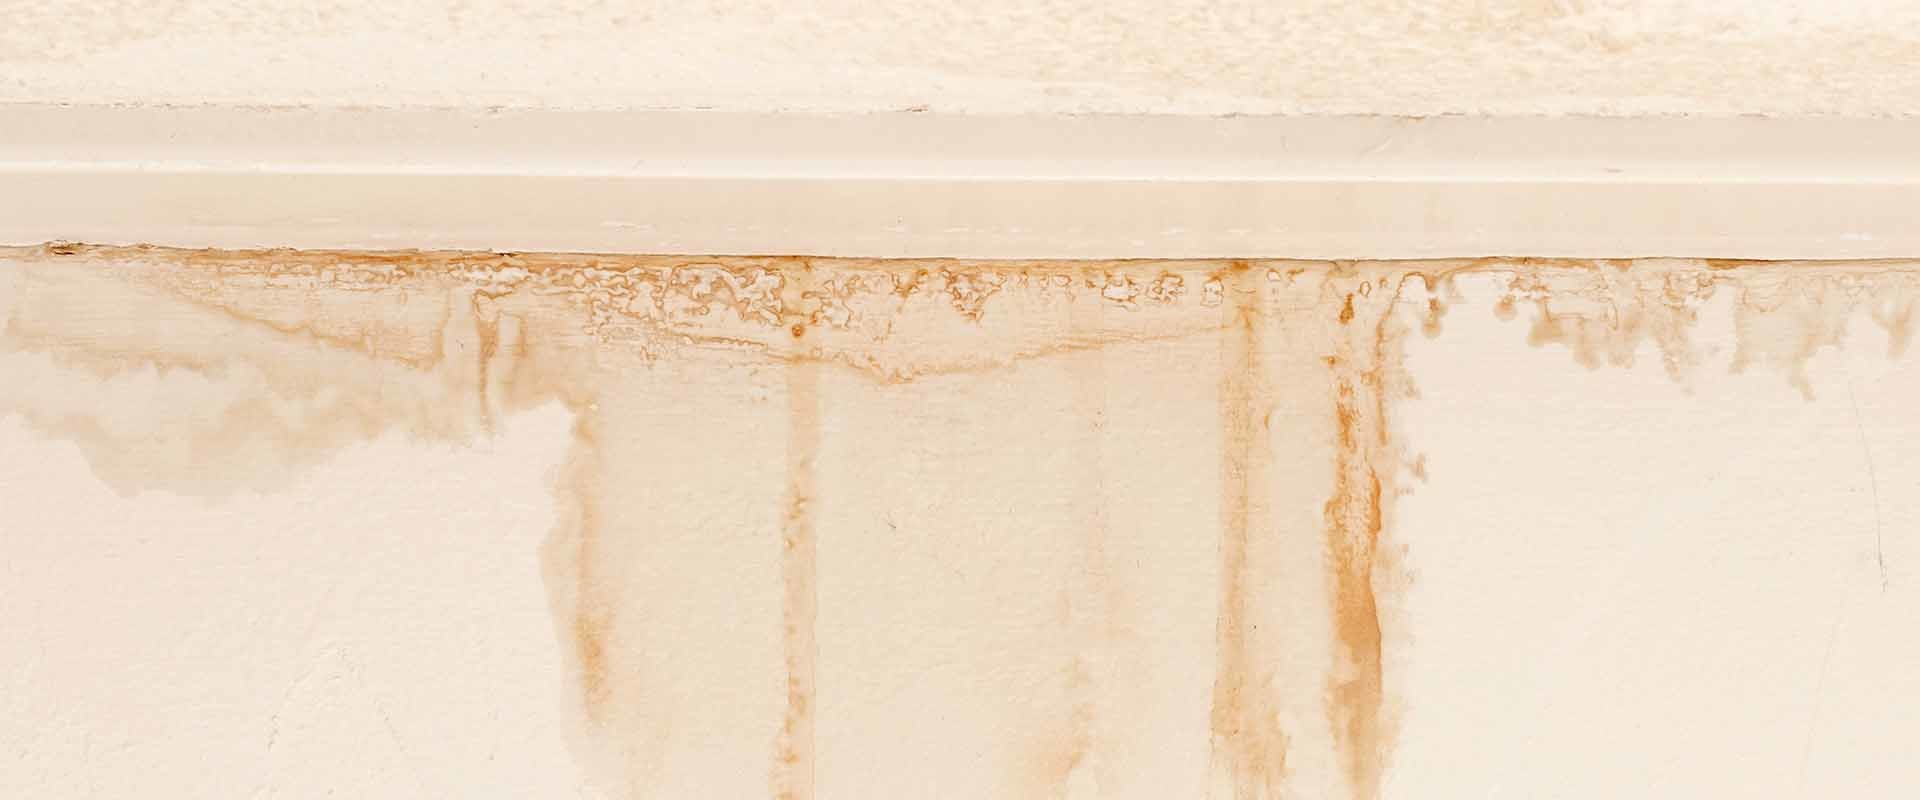 What are the first signs of water damage?